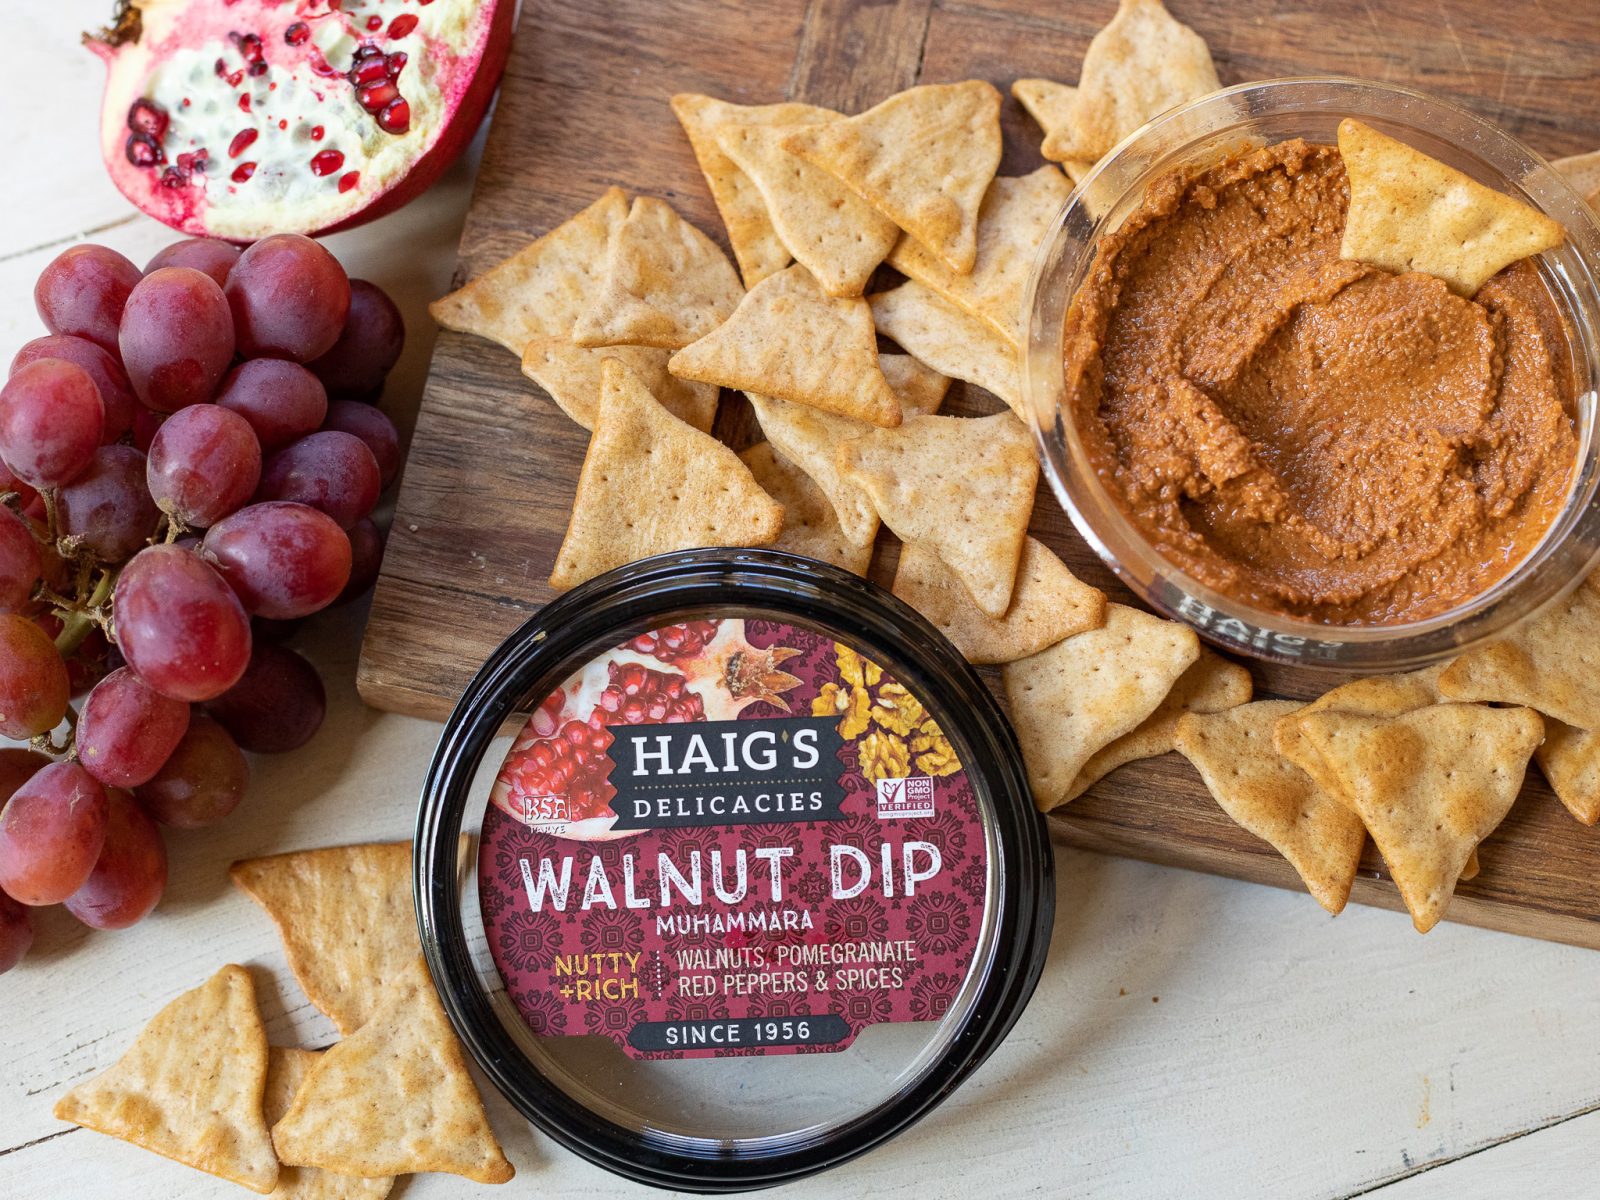 Haig’s Delicacies Walnut Dip Or Baba Ghannaouge As Low As 50¢ At Publix